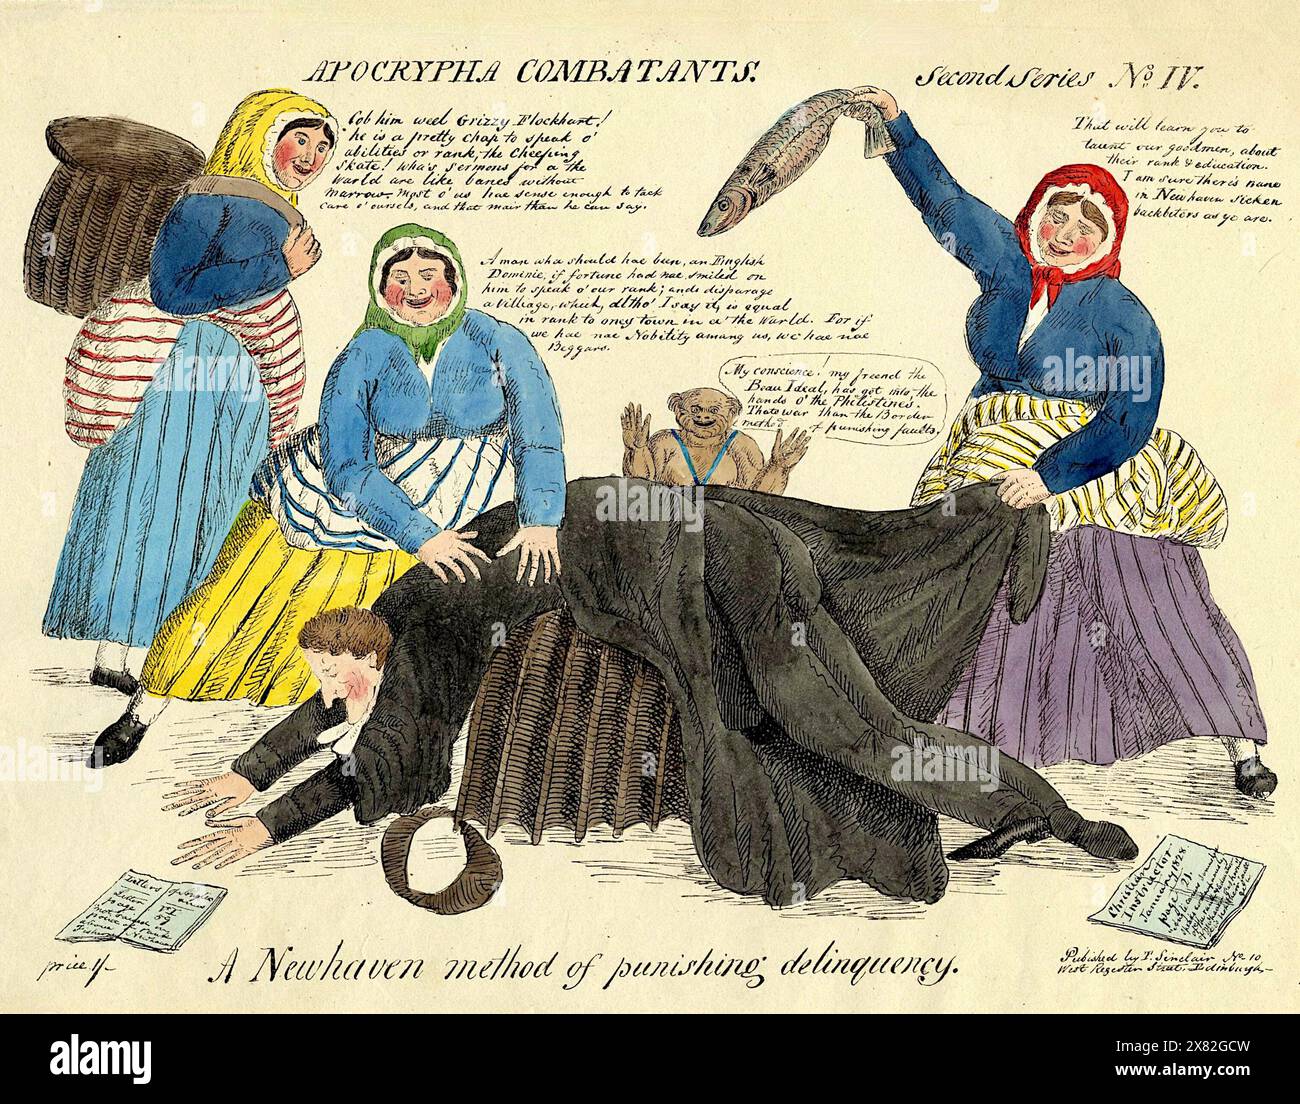 Apocrypha Combatants - A Newhaven method of punishing delinquency - 1828 Stock Photo